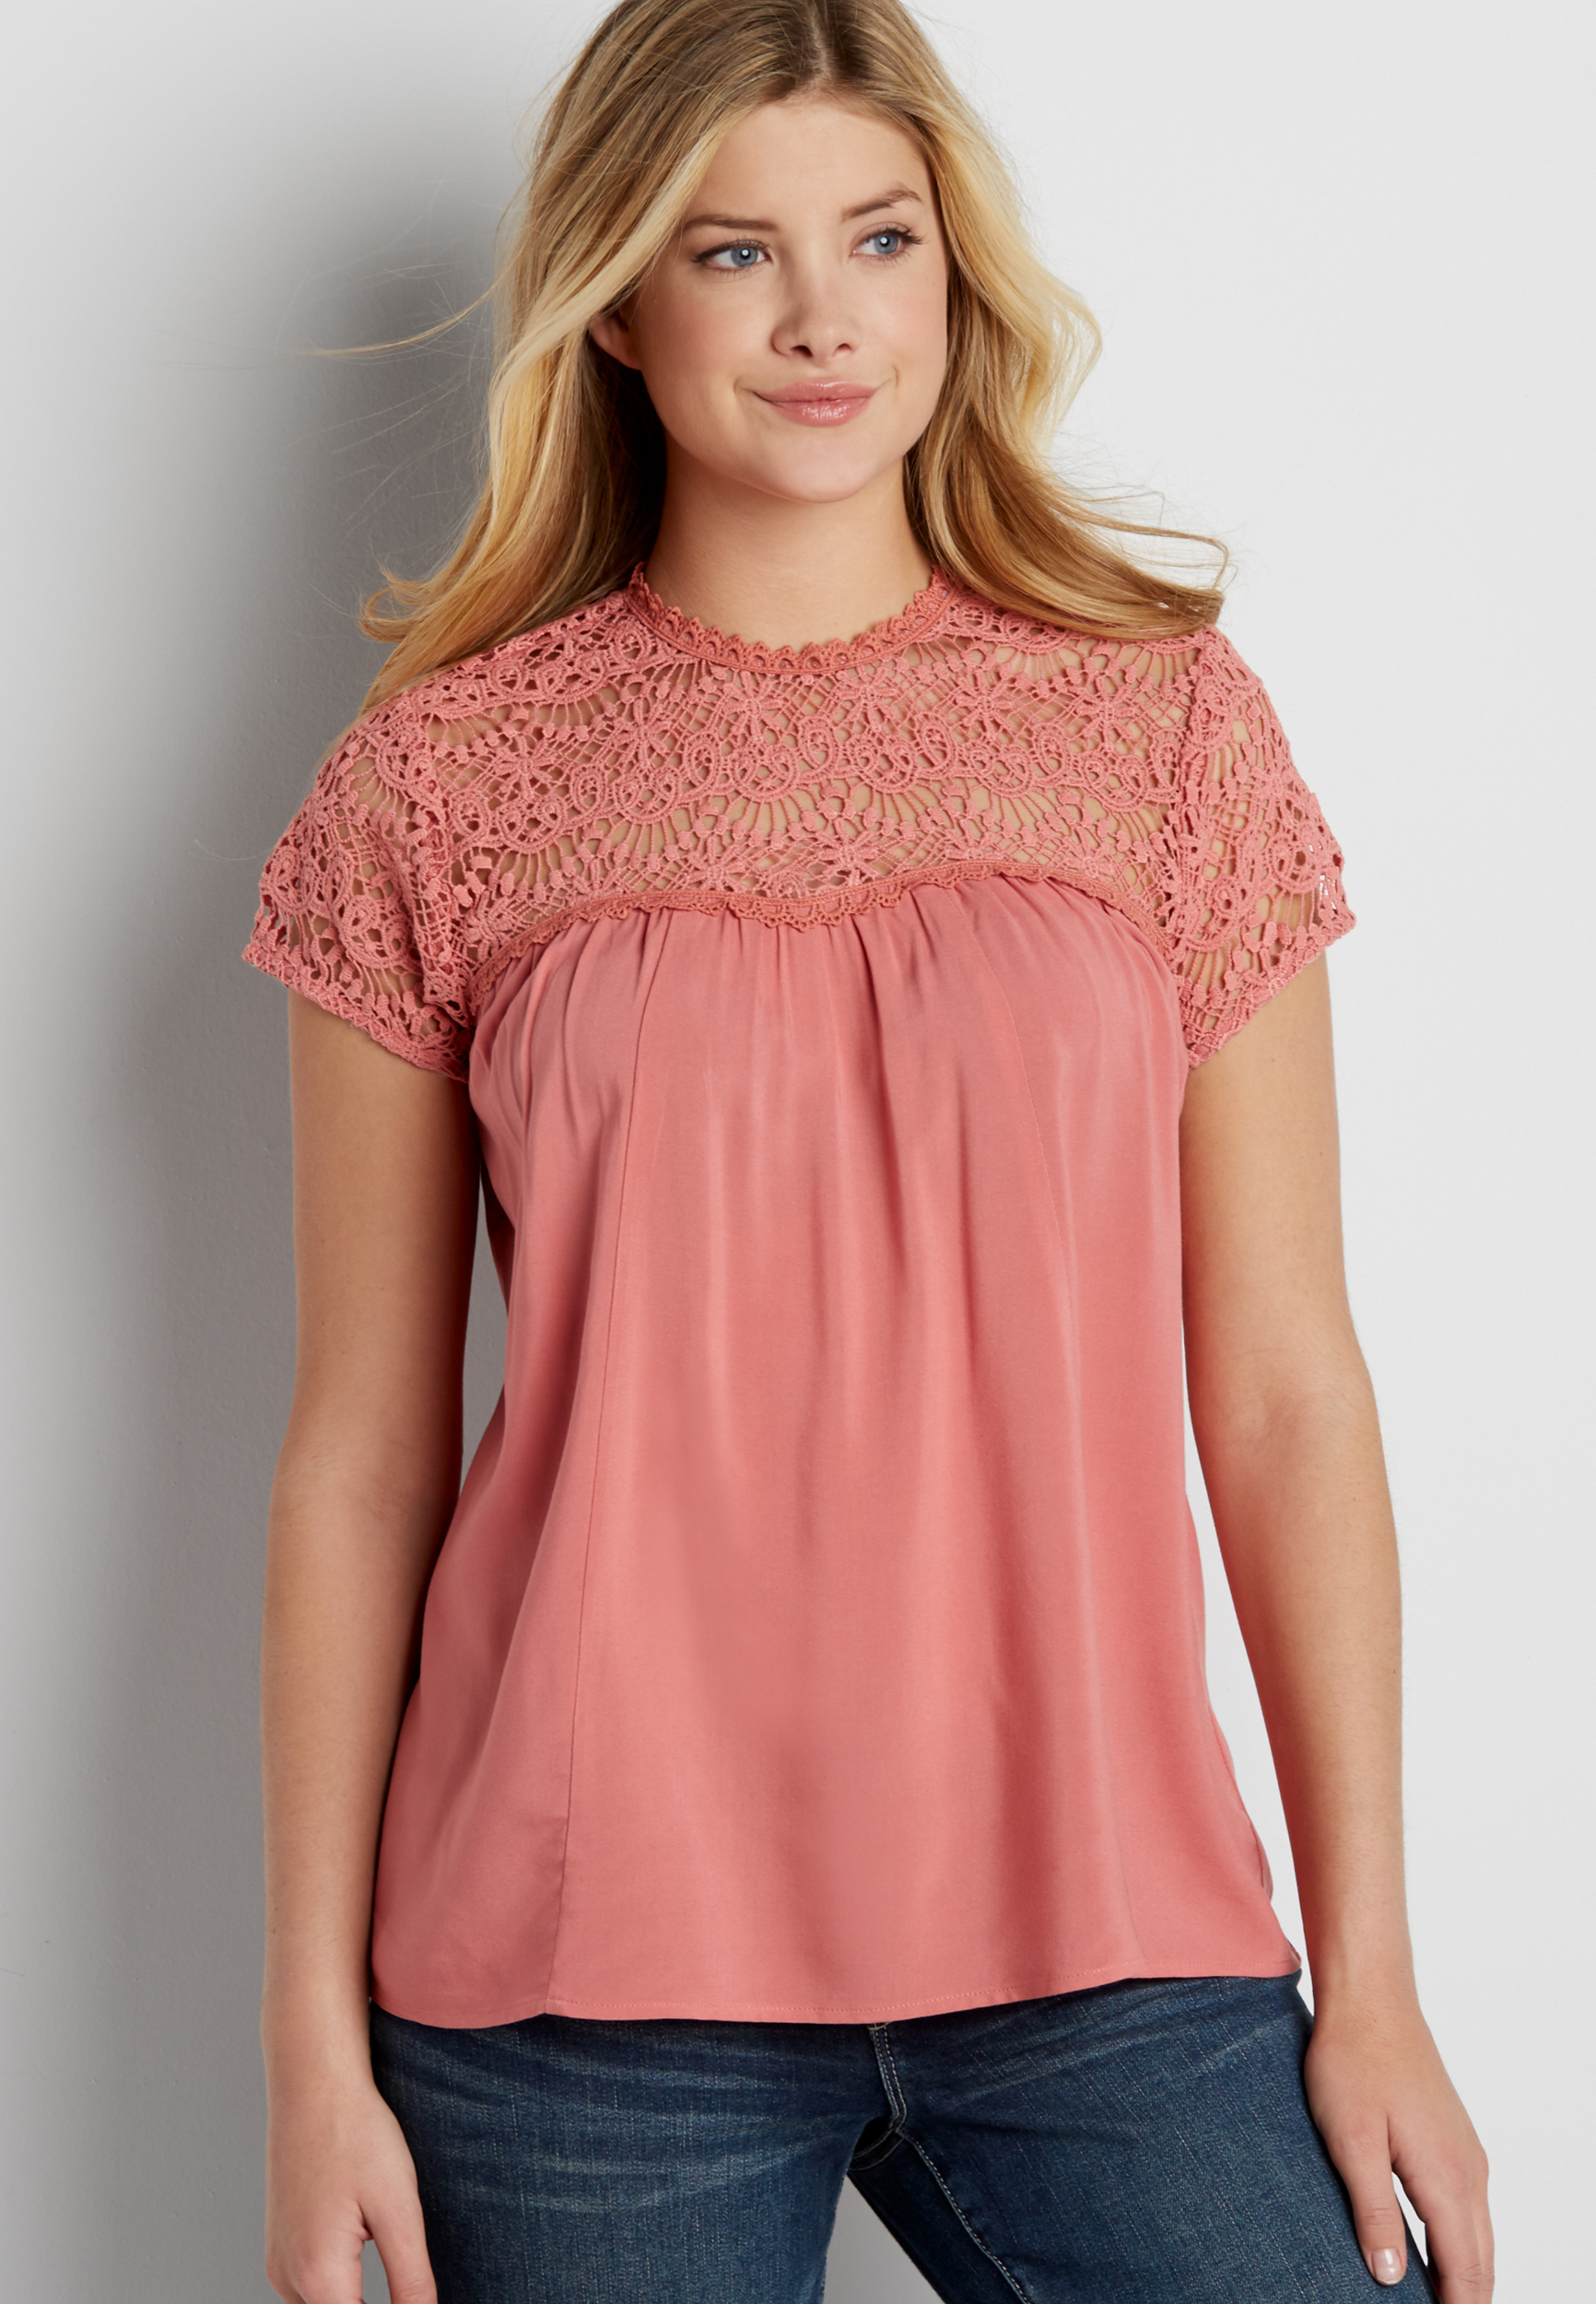 solid top with crocheted yoke | maurices